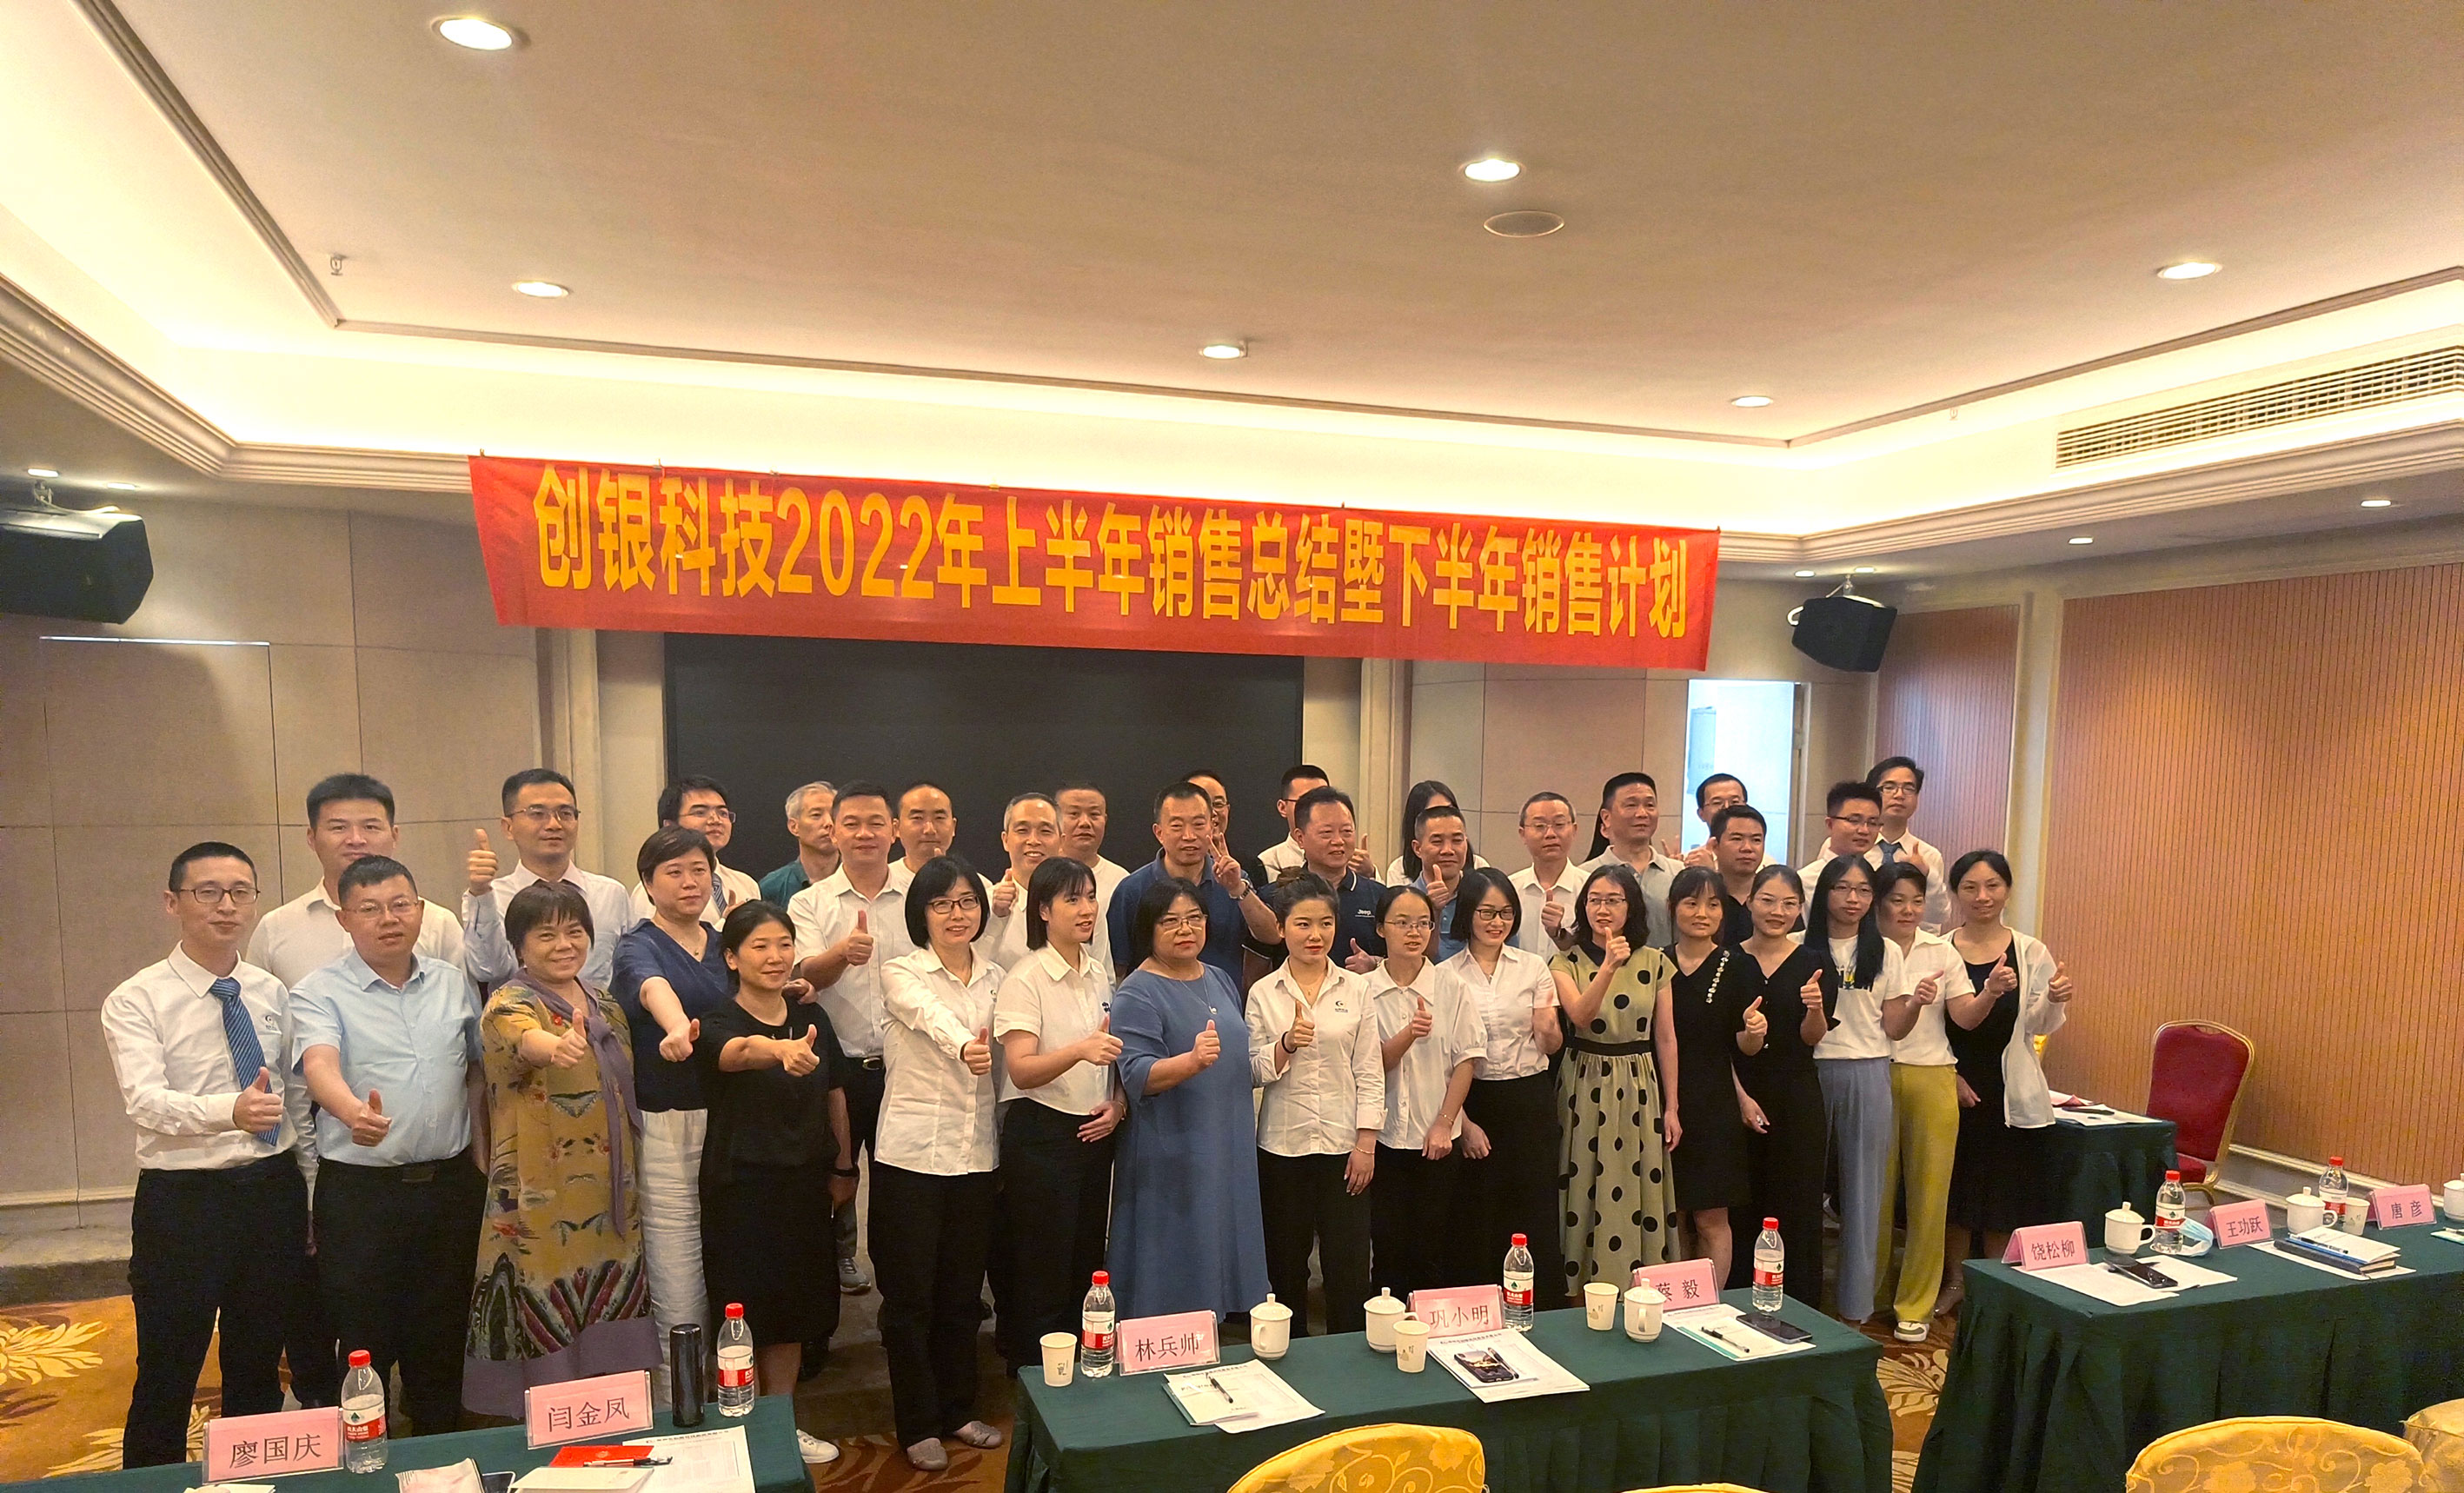 Chuangyin Technology | The sales work summary in the first half of 2022 and the sales work plan meeting in the second half of the year were successfully held